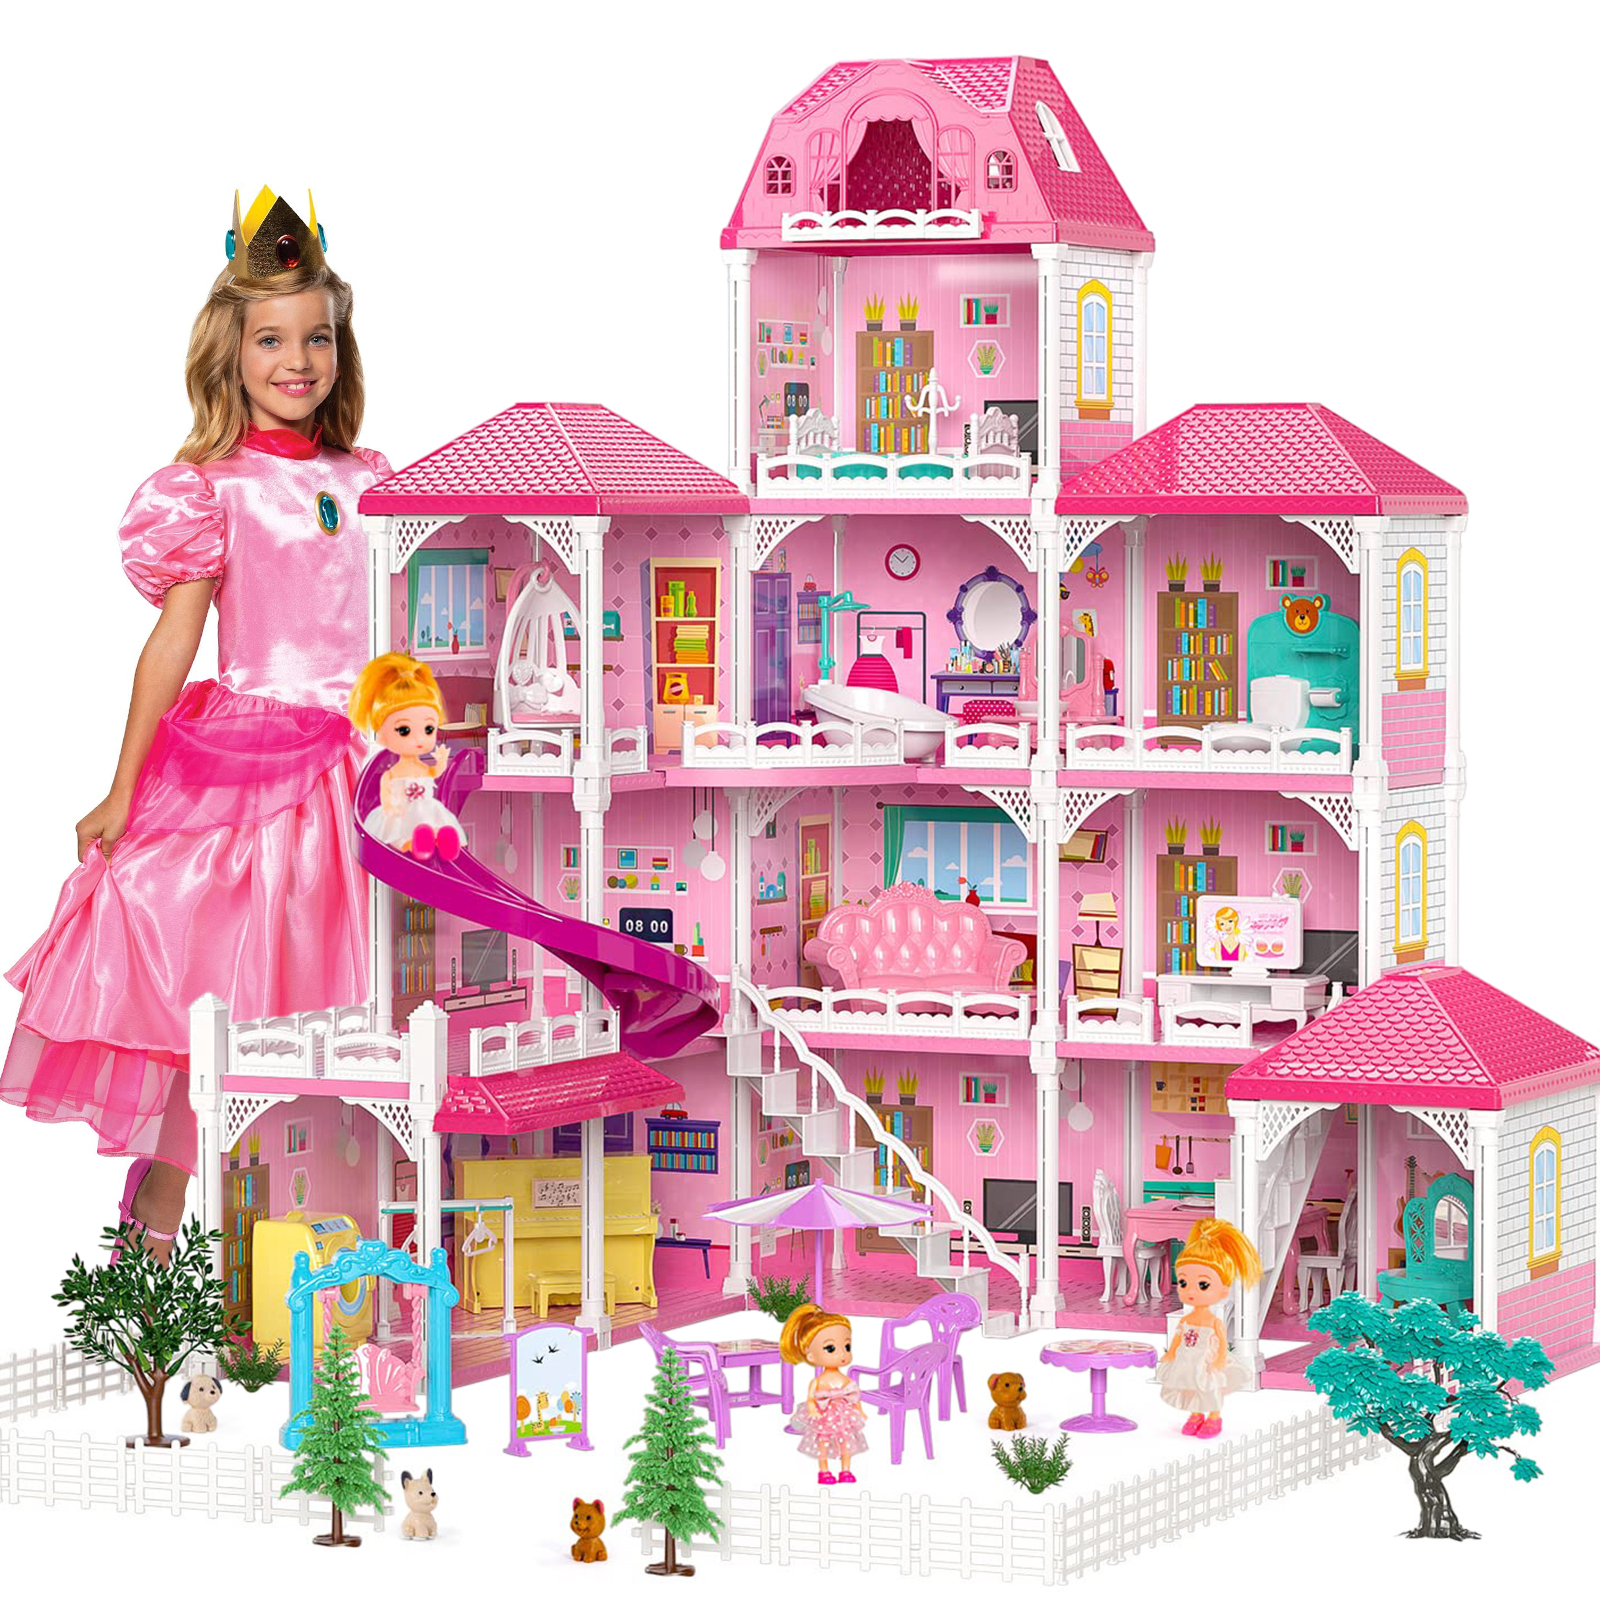 Hot Bee Dollhouse for Girls,4-Story 12 Rooms Playhouse with 2 Dolls Toy Figures,Pretend Dreamhouse with Accessories,Gift Toy for Kids Ages 3 4 5 6 - image 1 of 7